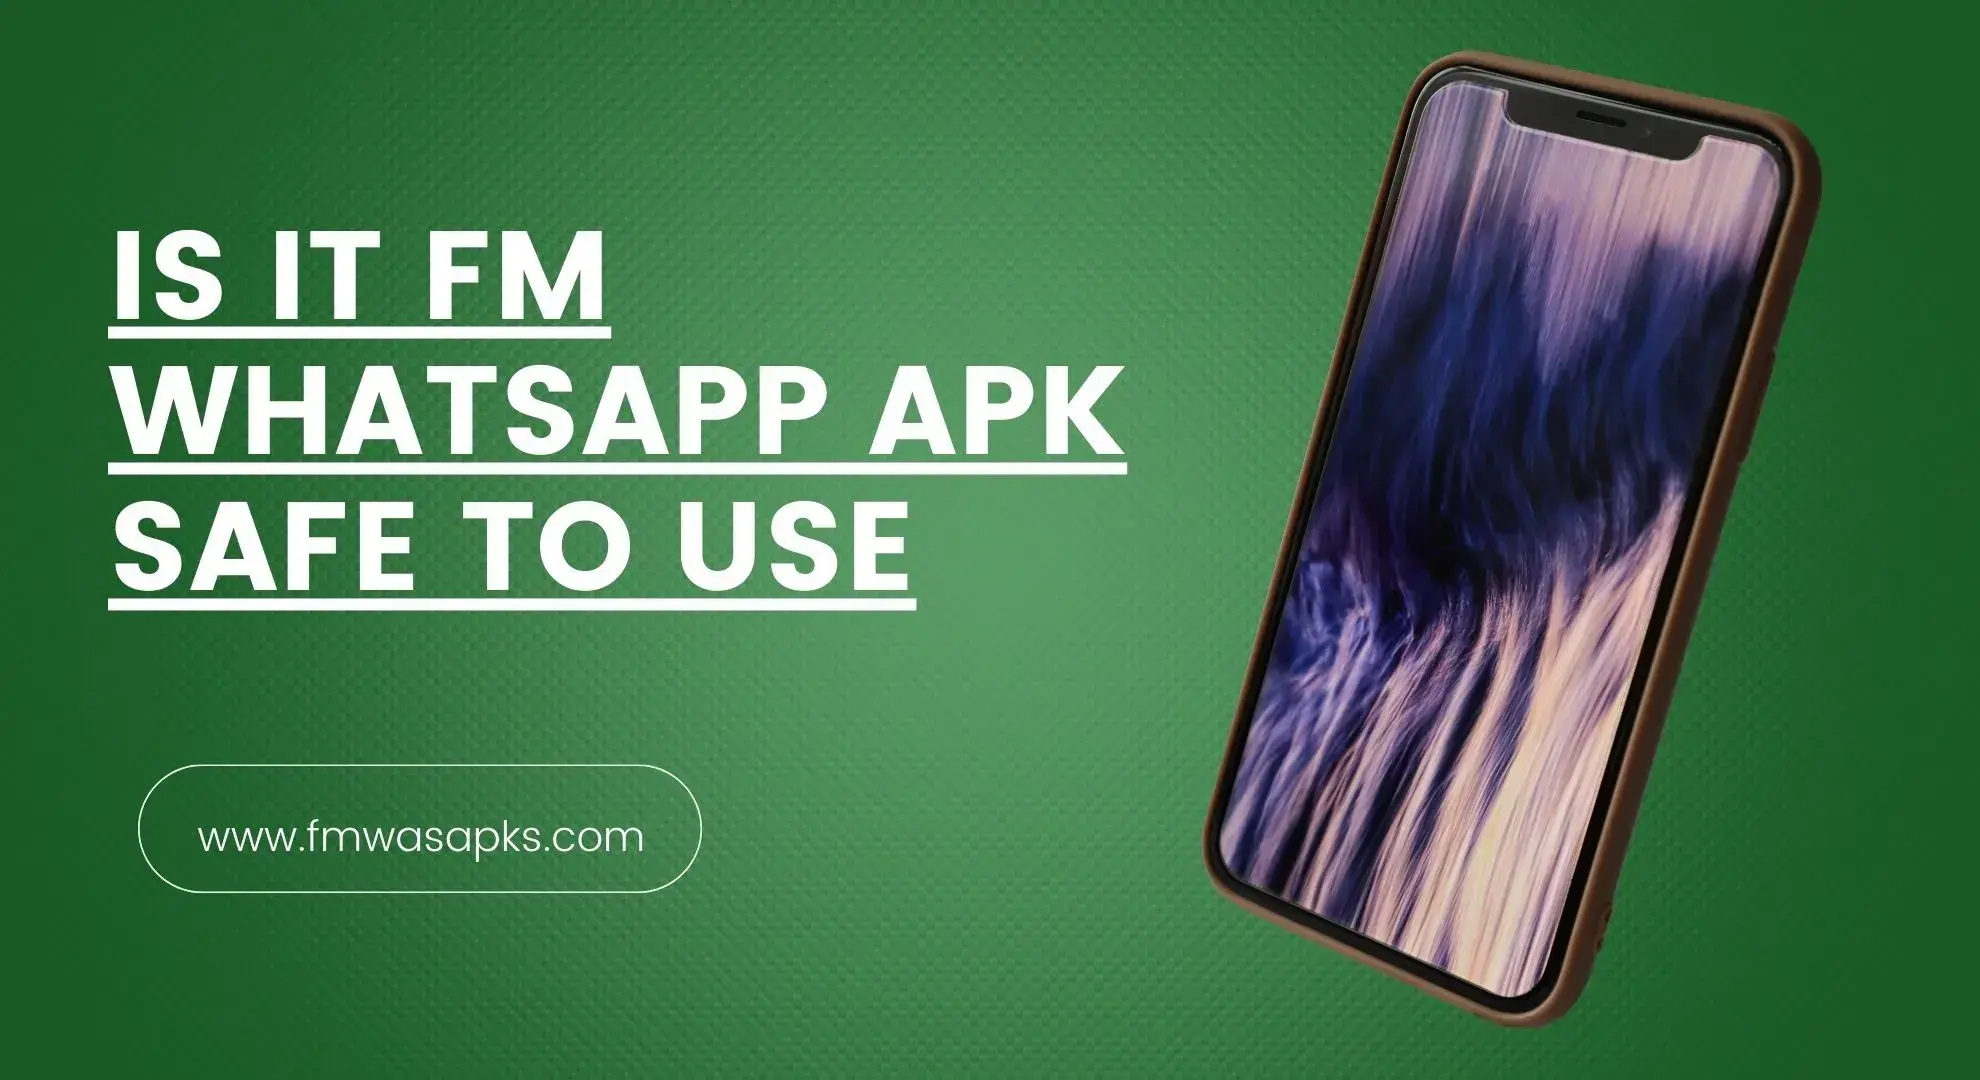 Is It FM WhatsApp APK Safe to Use